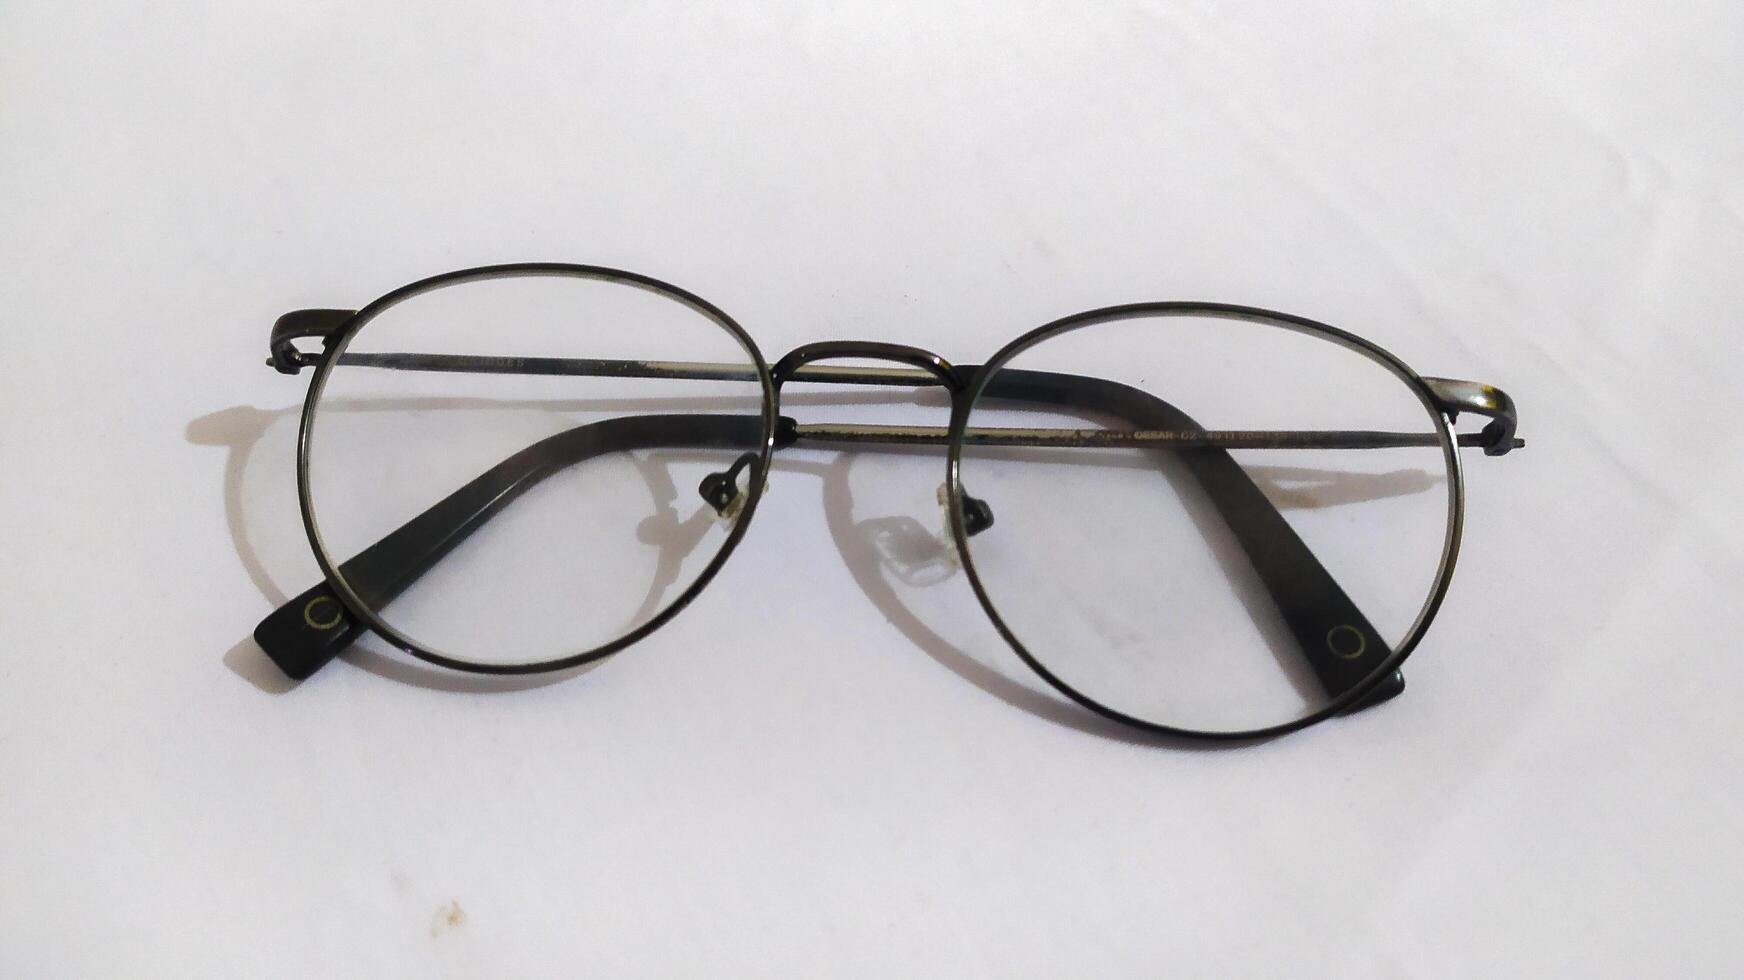 a pair of glasses photographed on a white background photo